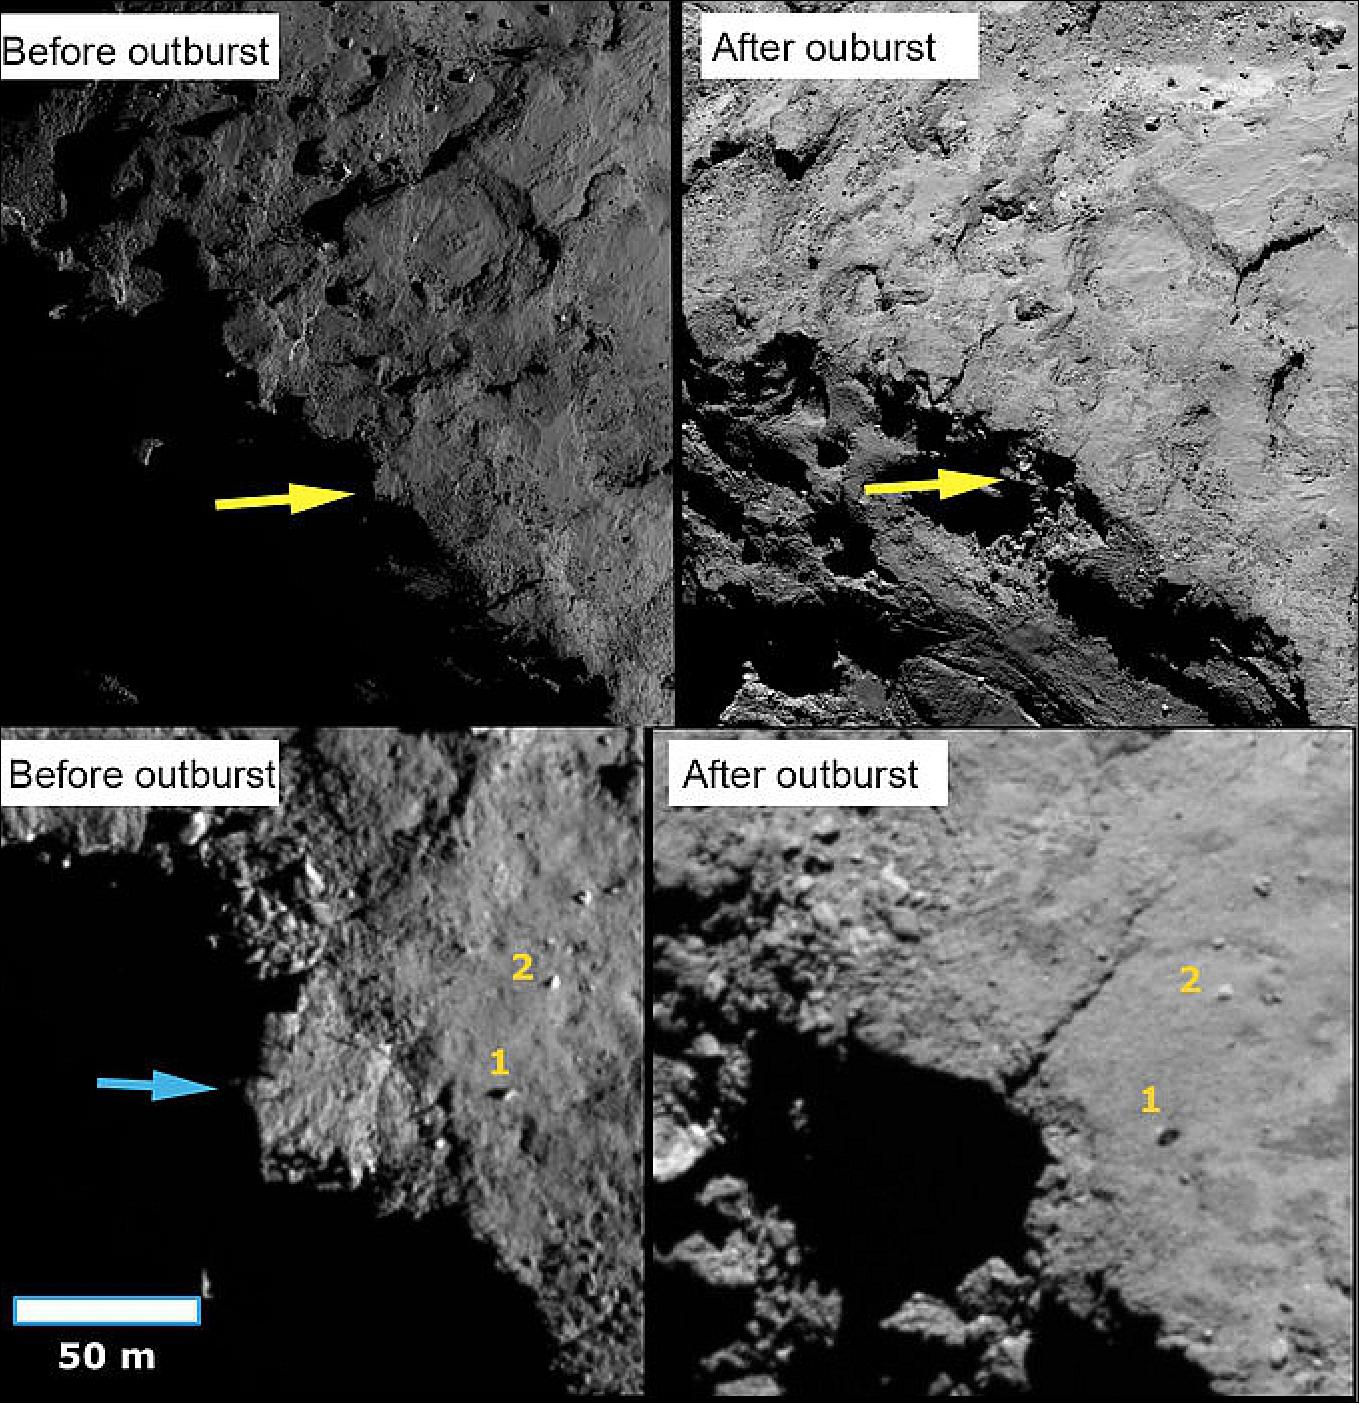 Figure 55: Cliff collapse before and after. Before and after a cliff collapse on Comet 67P/Churyumov-Gerasimenko. In the upper panels the yellow arrows show the location of a scarp at the boundary between the illuminated northern hemisphere and the dark southern hemisphere of the small lobe at times before and after the outburst event (September 2014 and June 2016, respectively). The lower panels show close-ups of the upper panels; the blue arrow points to the scarp that appears to have collapsed in the image after the outburst. Two boulders (1and 2) are marked for orientation [image credit: ESA/Rosetta/MPS for OSIRIS Team MPS/UPD/LAM/IAA/SSO/INTA/UPM/DASP/IDA (CC BY-SA 4.0)]